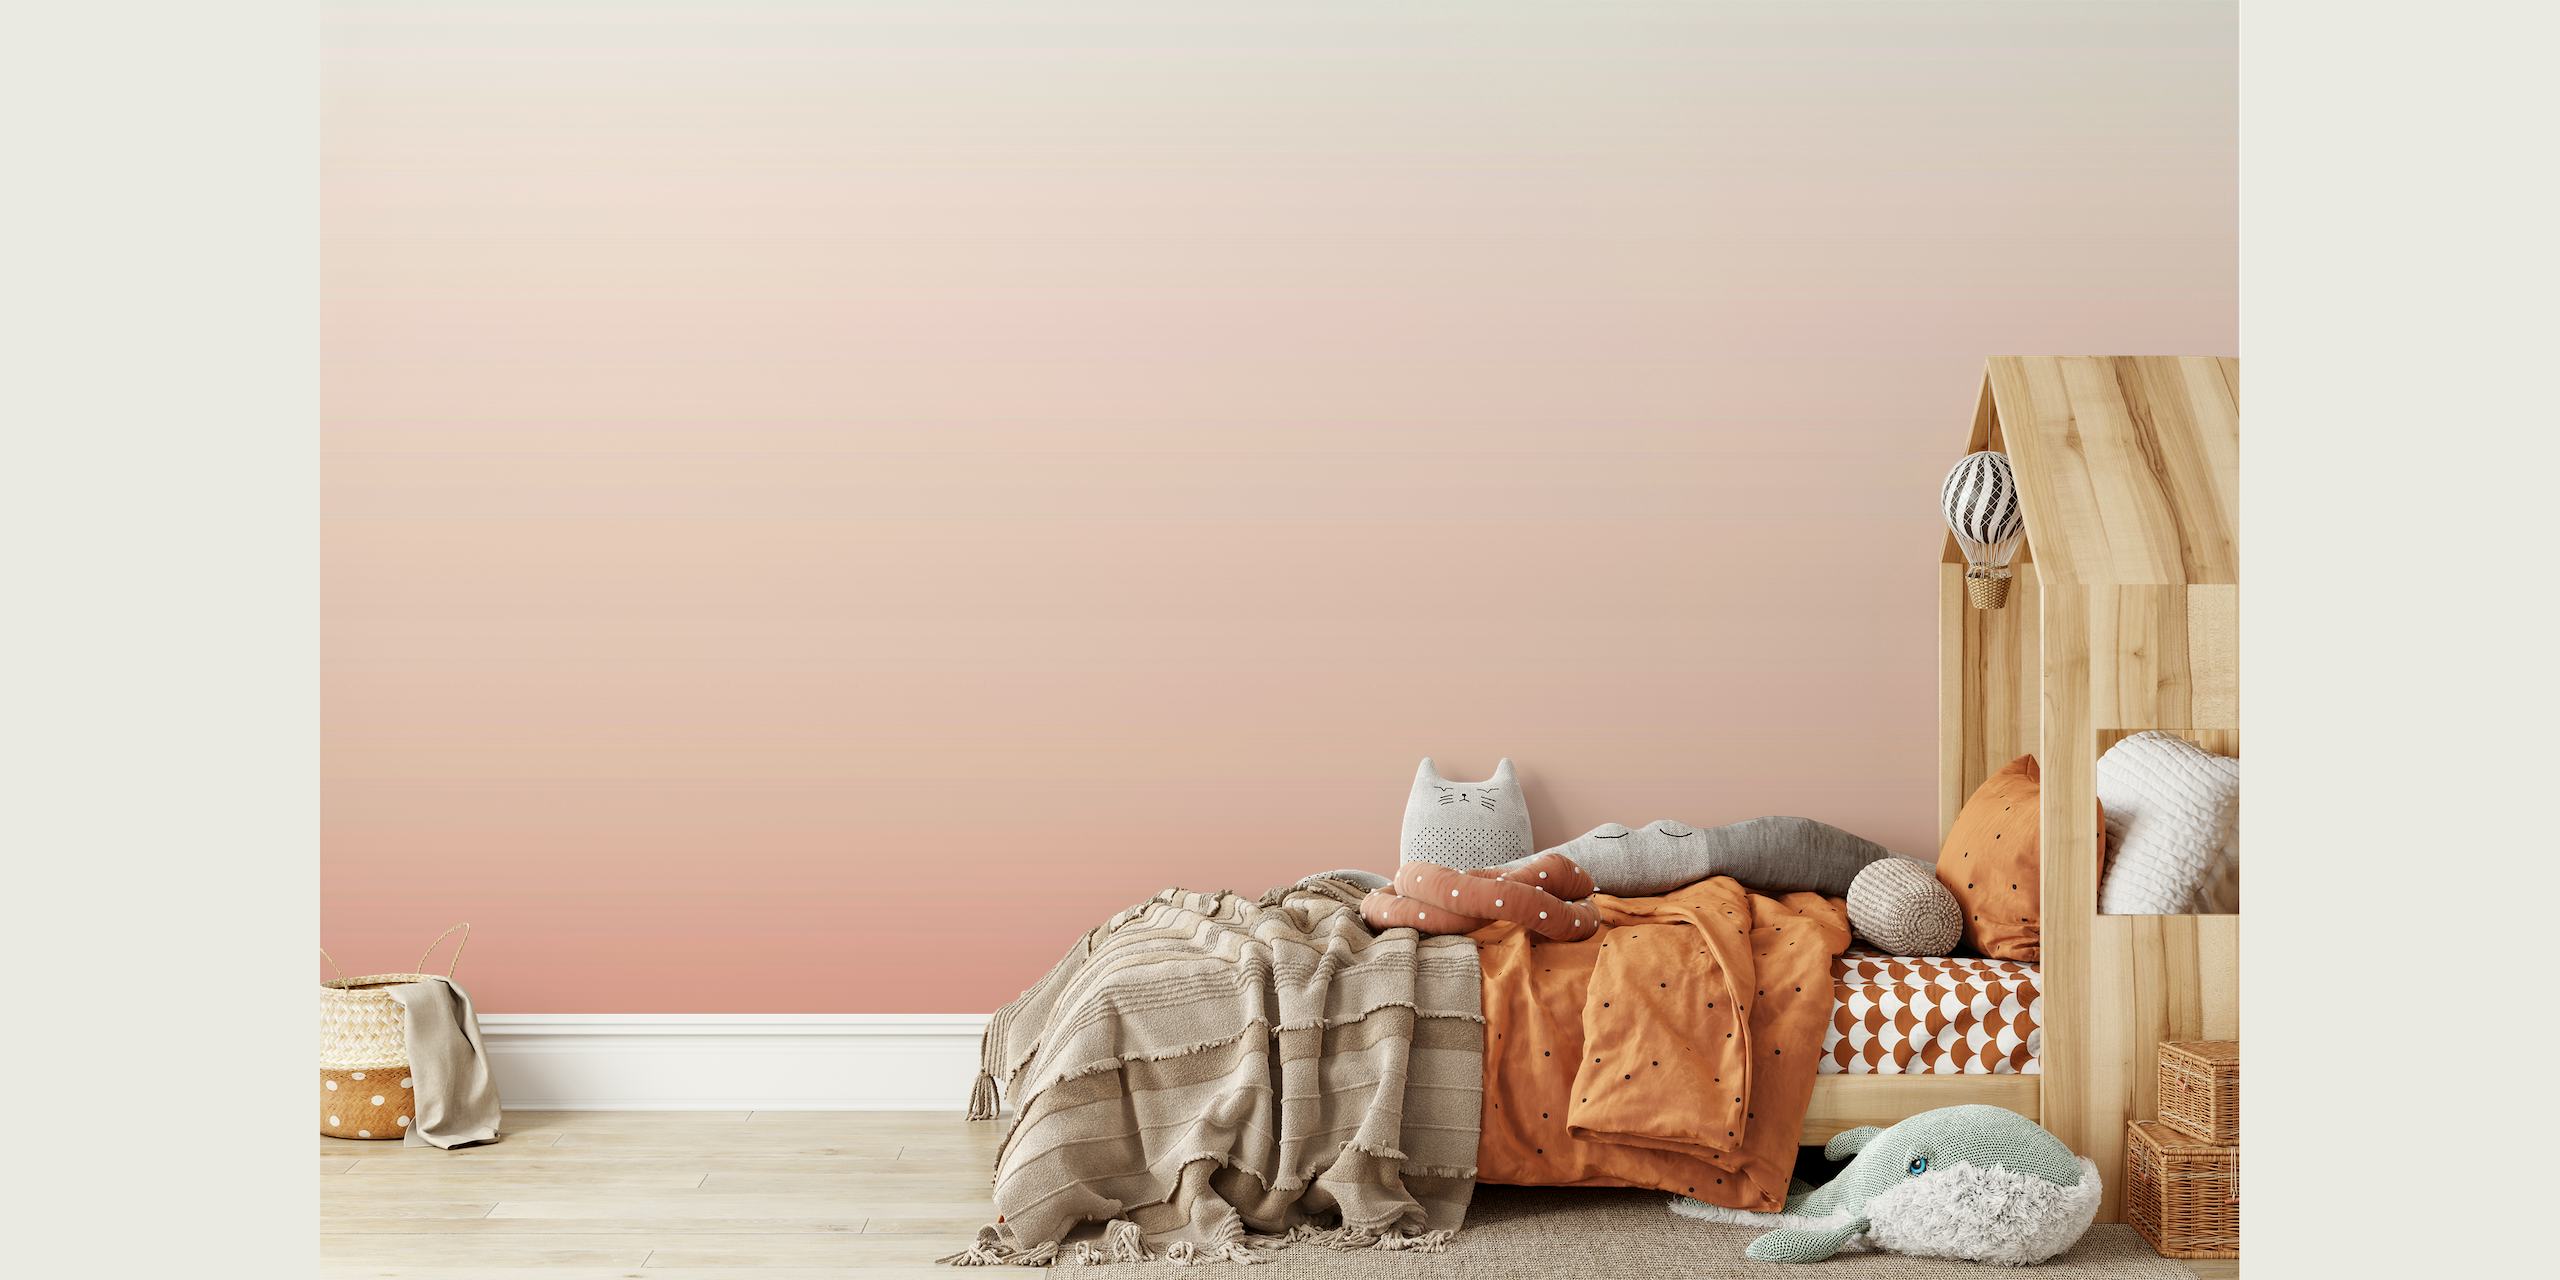 Boho Ombre wall mural with gradient colors